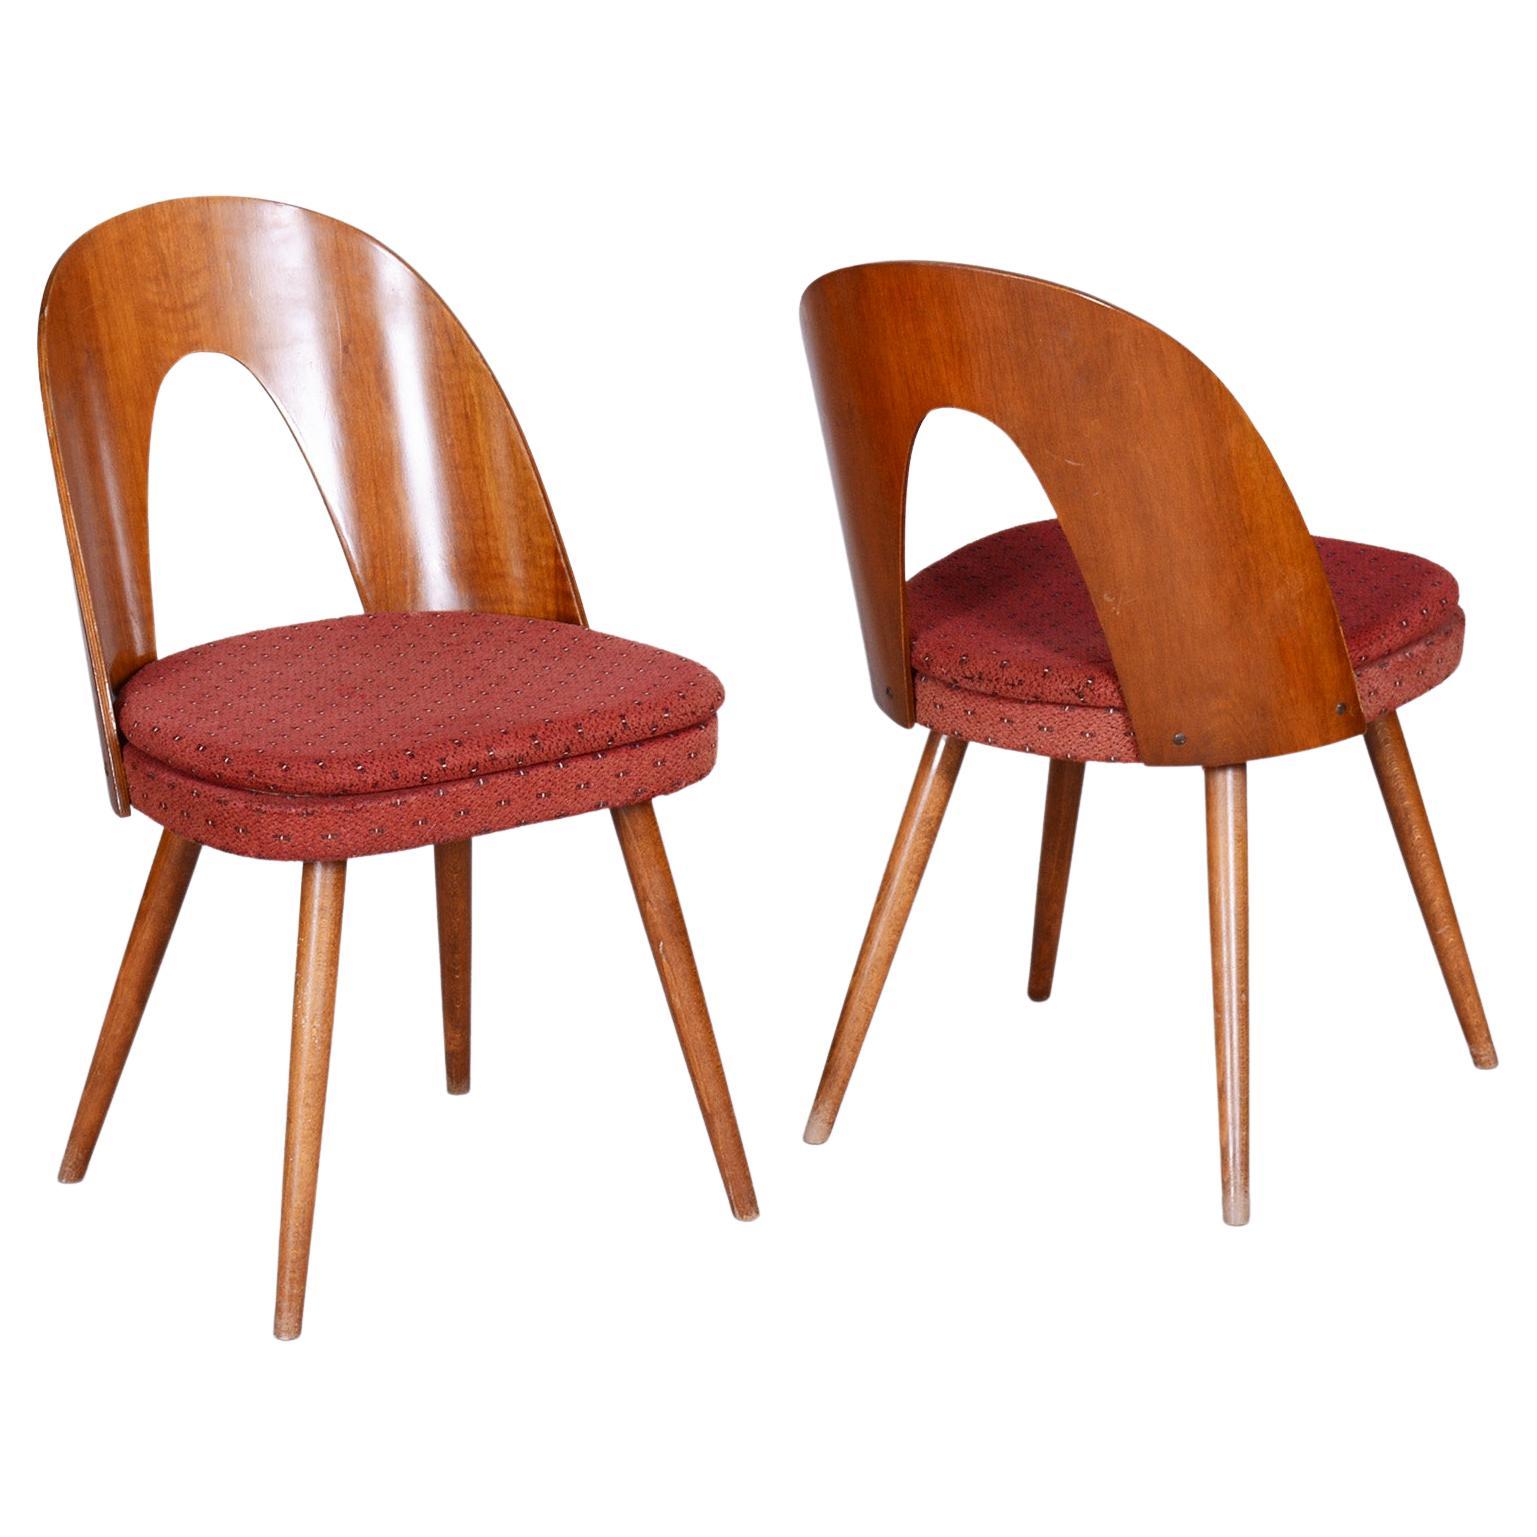 Pair of Mid-Century Chairs Designed by Antonin Suman, 1950s, Czechia For Sale